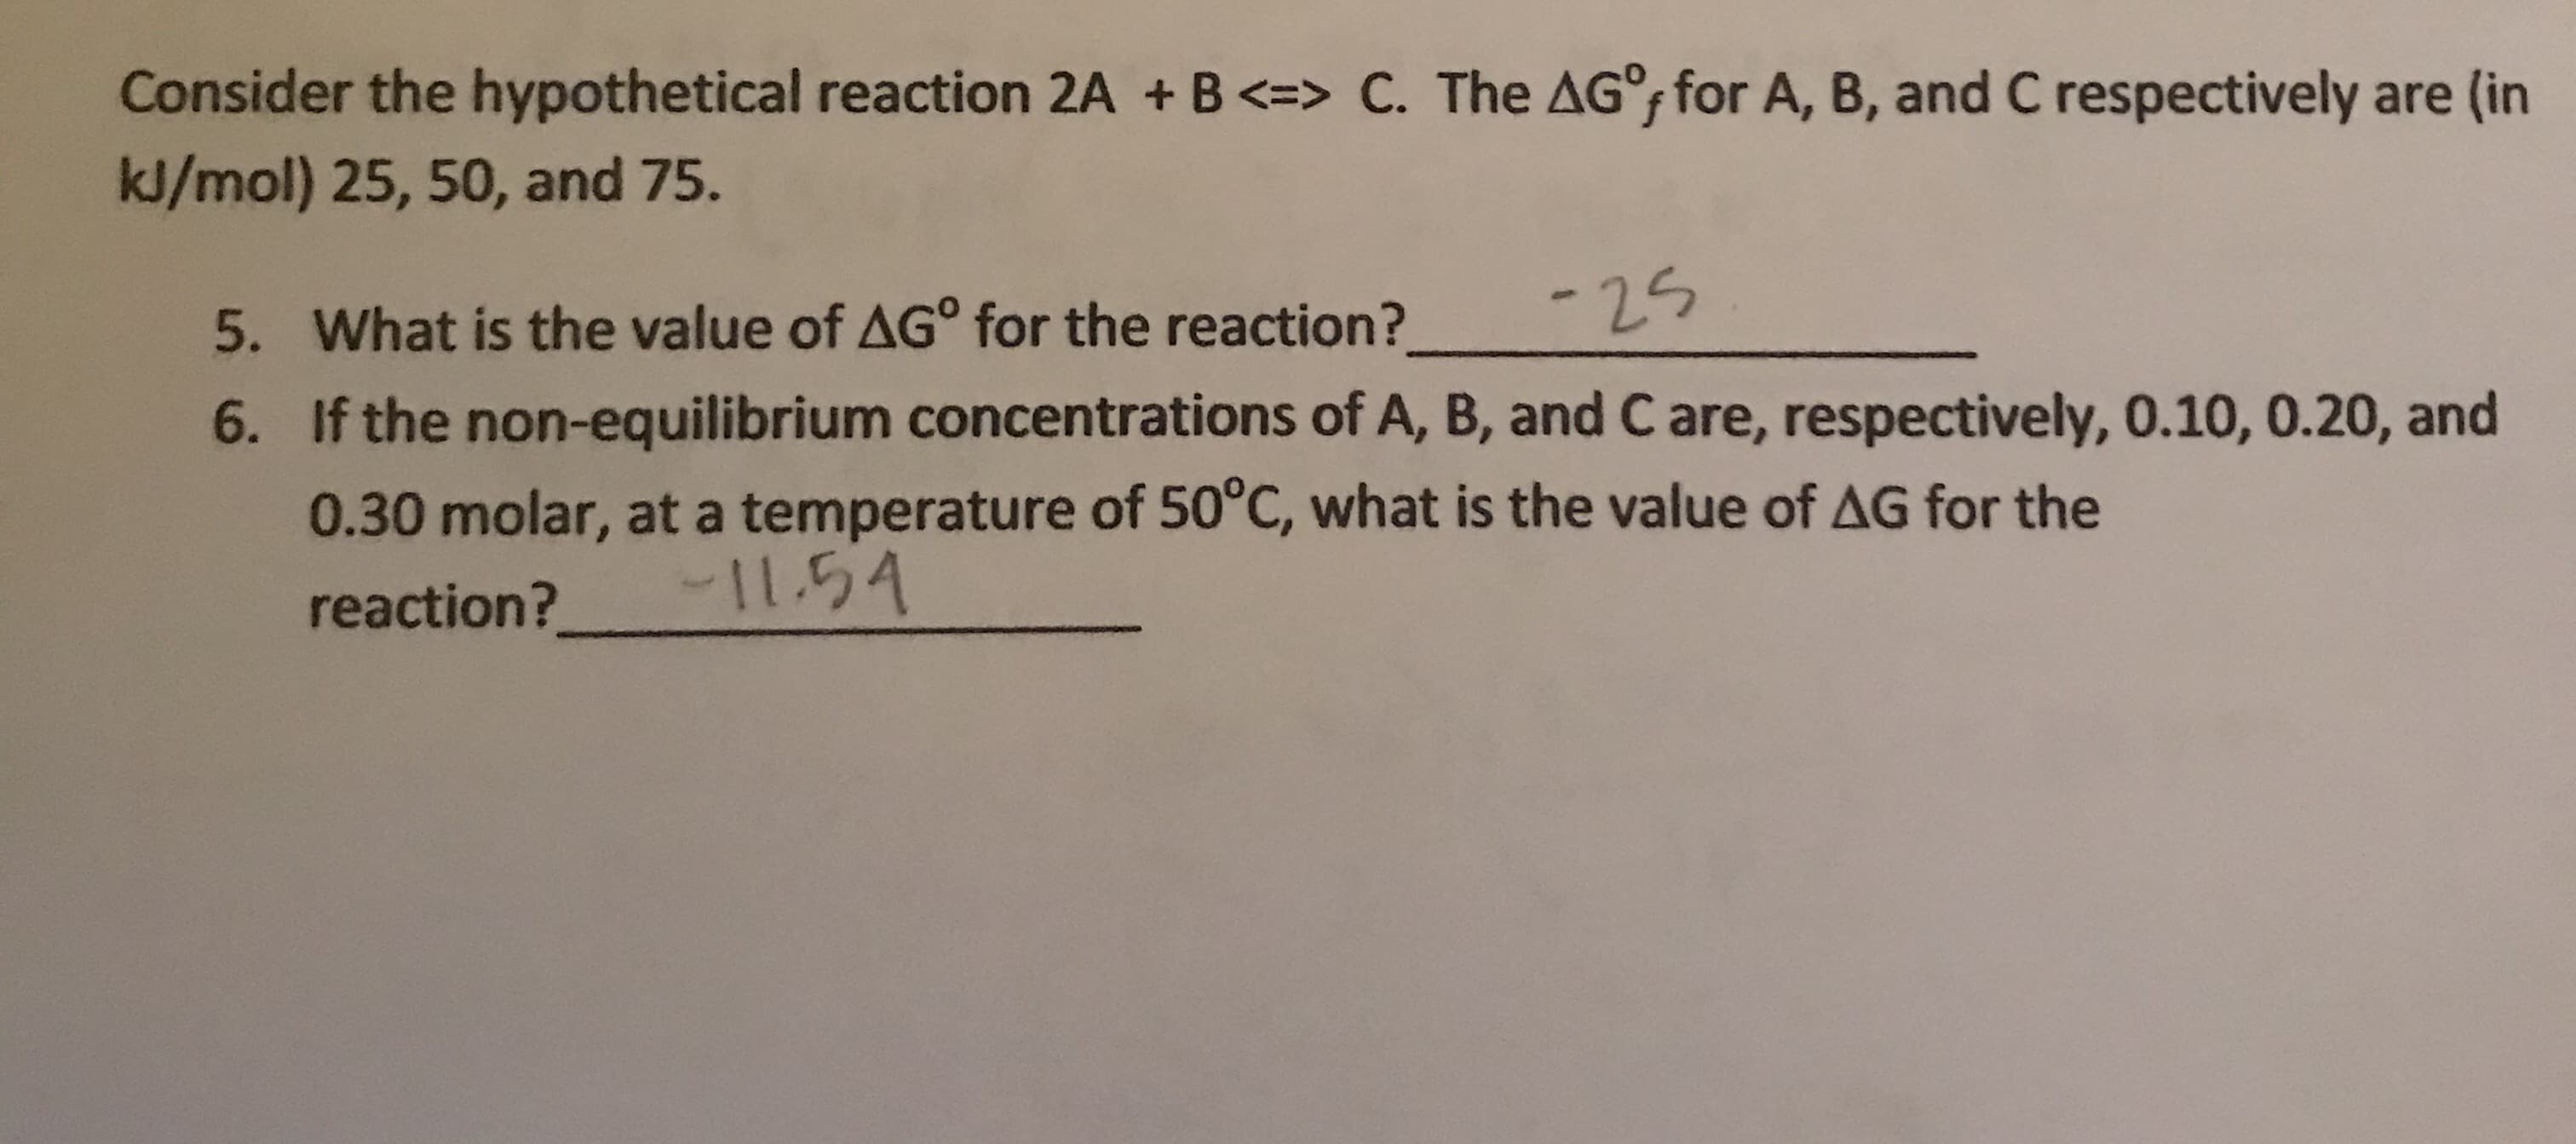 Consider the hypothetical reaction 2A + B<=> C. The AG for A, B, and C respectively
kJ/mol) 25, 50, and 75.
-24
What is the value of AG° for the reaction?
5.
If the non-equilibrium concentrations of A, B, and C are, respectively, 0.10, 0.20, and
6.
0.30 molar, at a temperature of 50°C, what is the value of AG for the
-I154
reaction?
